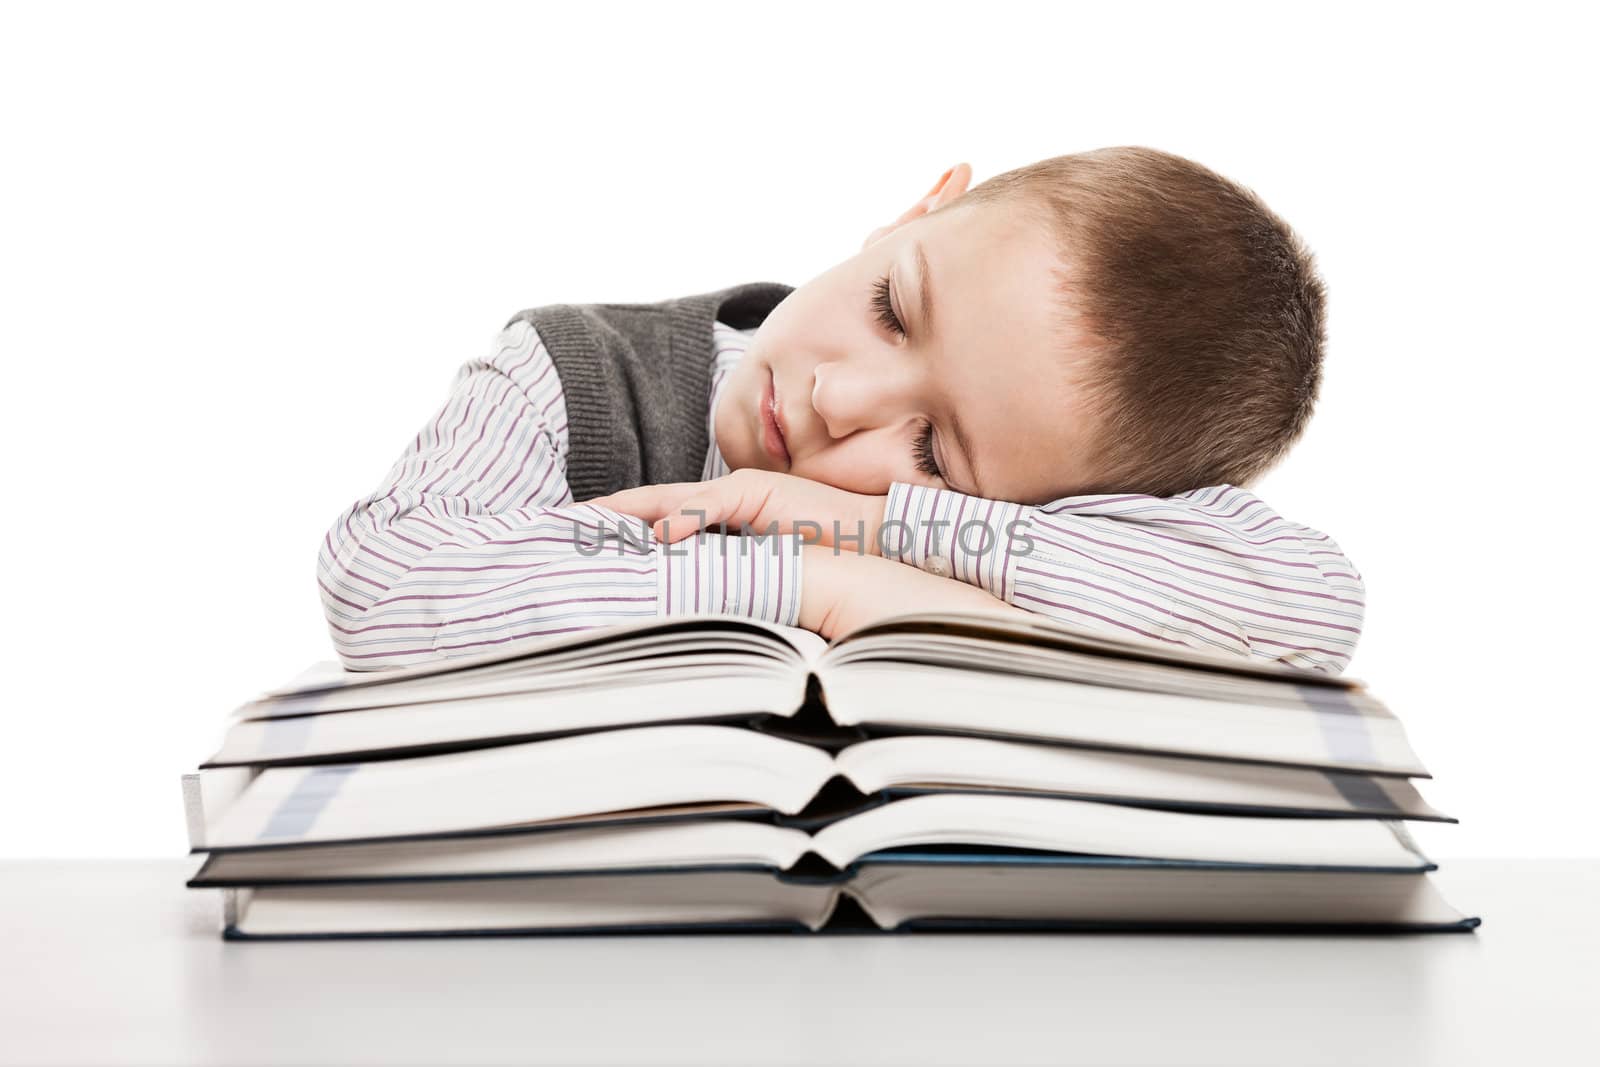 Child sleeping on reading books by ia_64